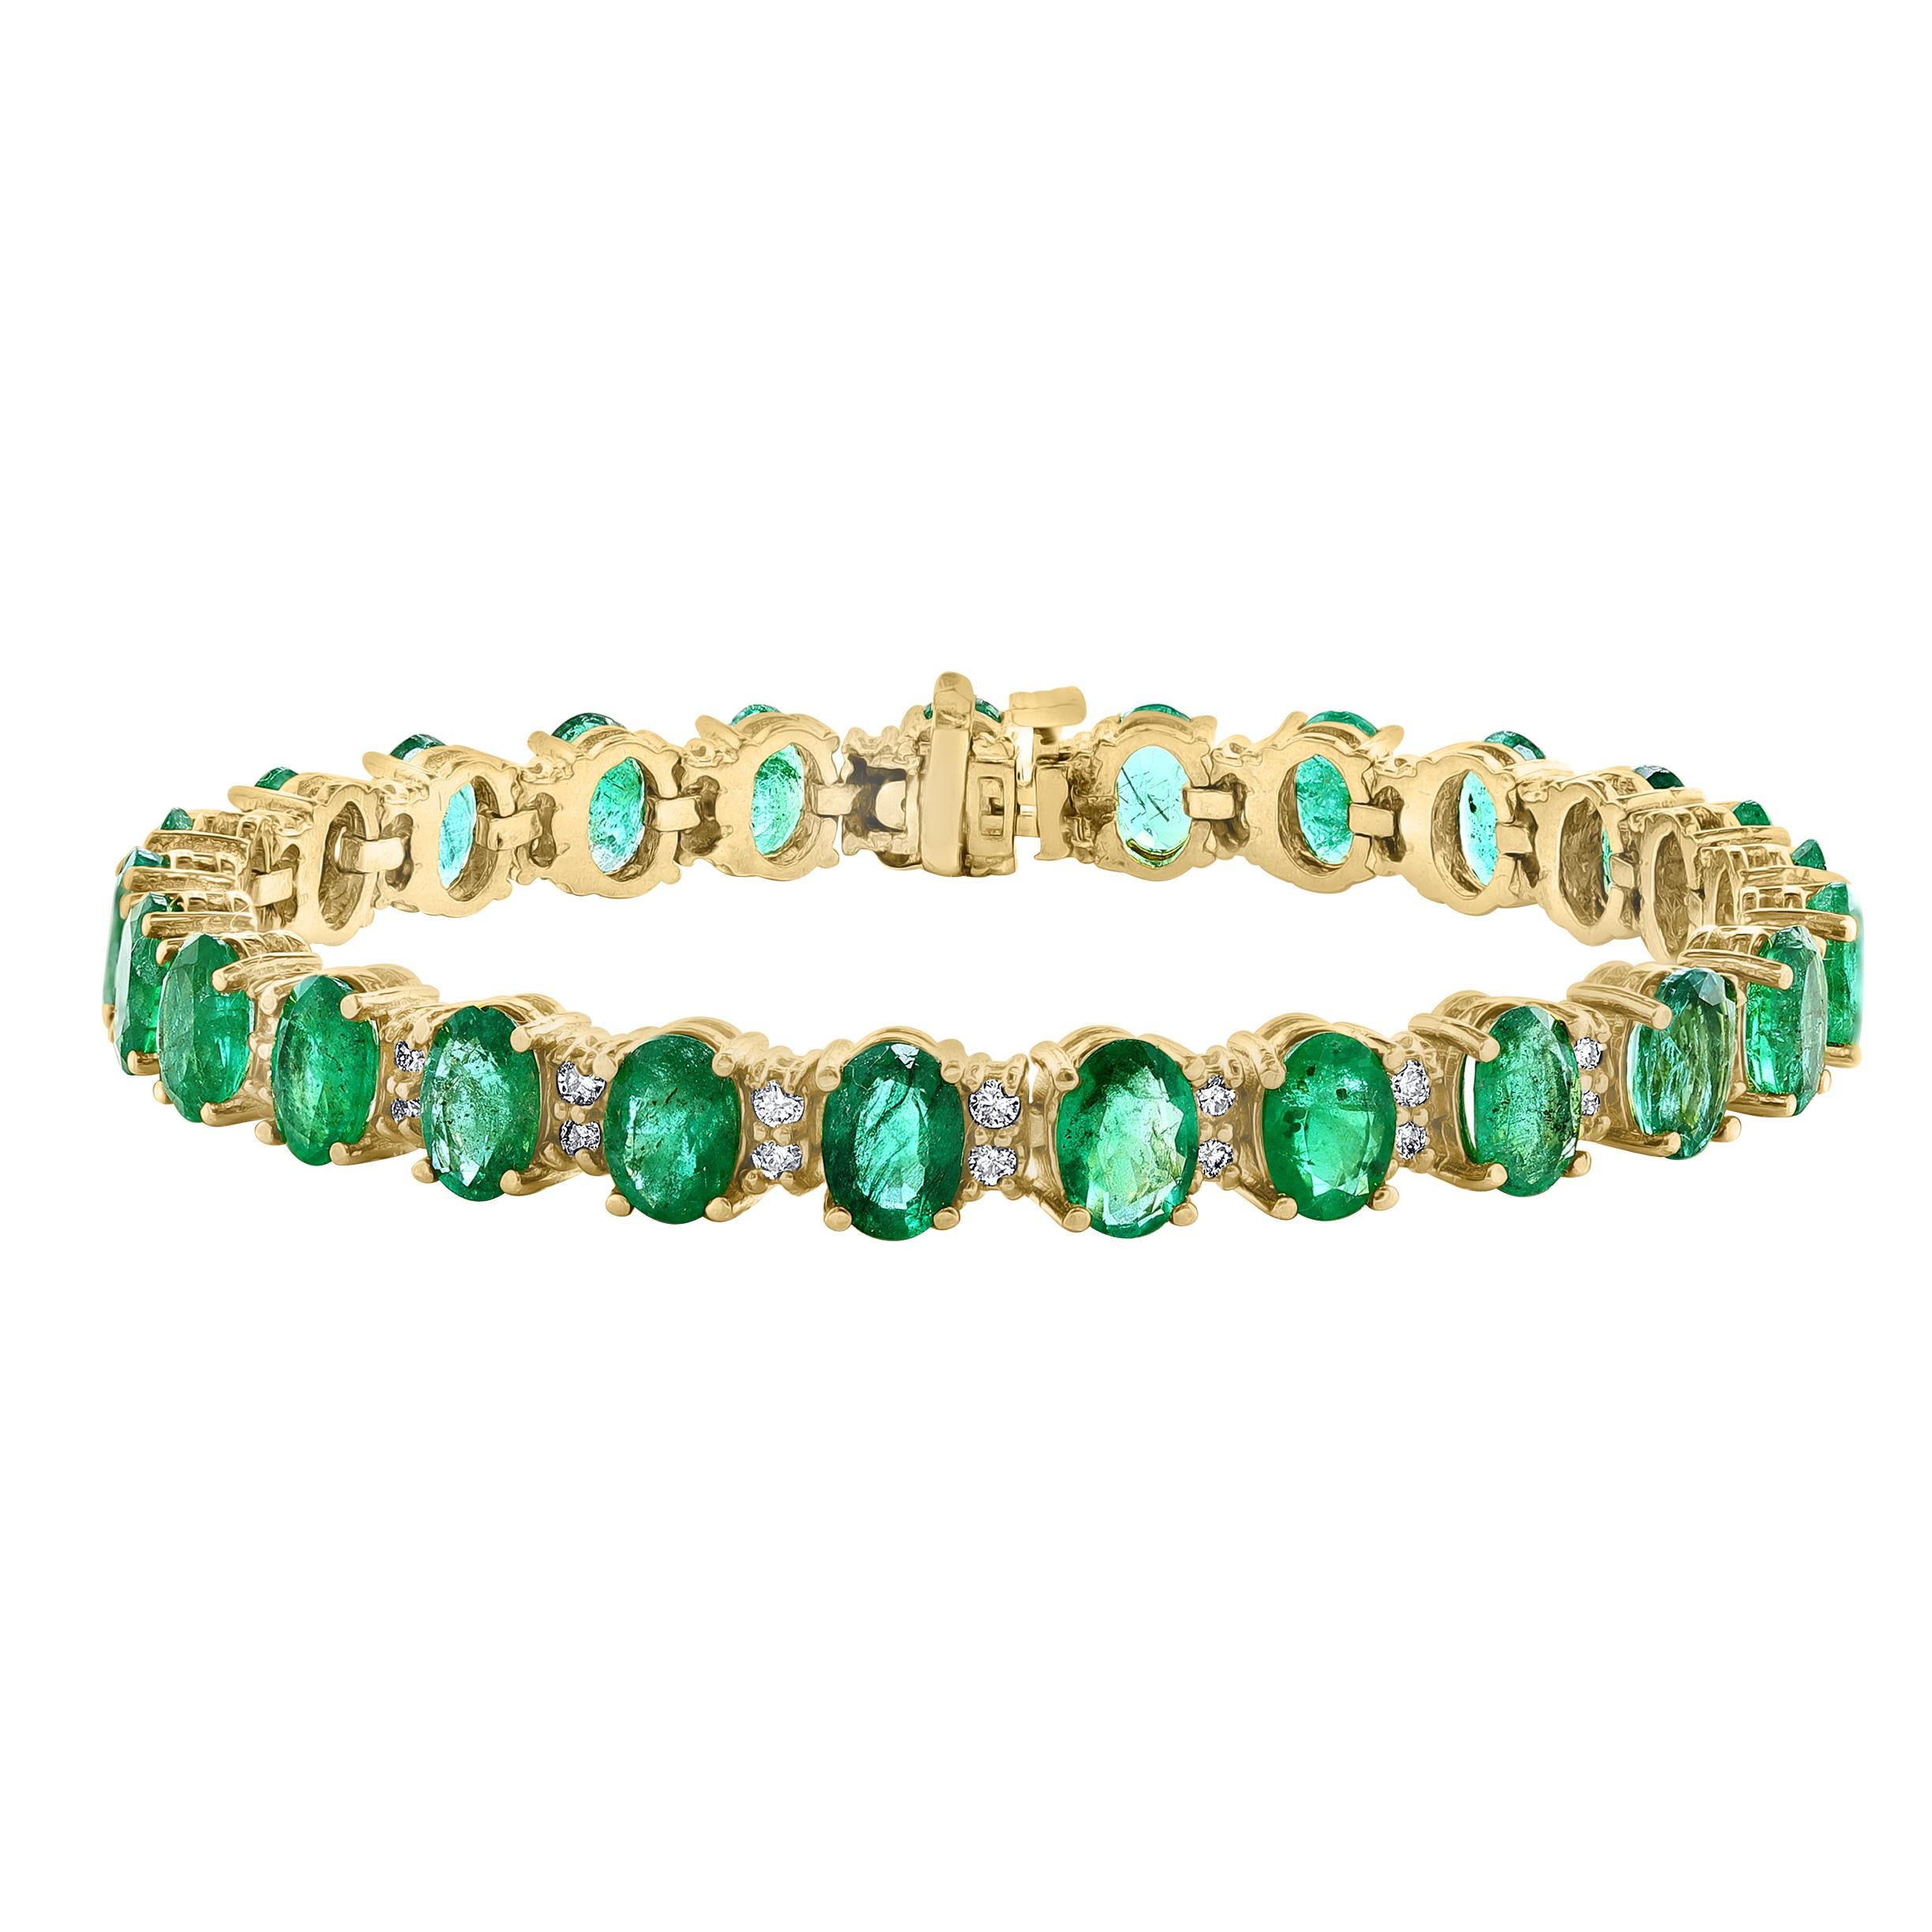  This exceptionally affordable Tennis  bracelet has  25 stones of  Natural  oval shape   Emeralds  . Each Emerald is spaced by two diamonds .Total weight of Emerald is  approximately 25 carat . Total number of diamonds are 50 and diamond weighs is